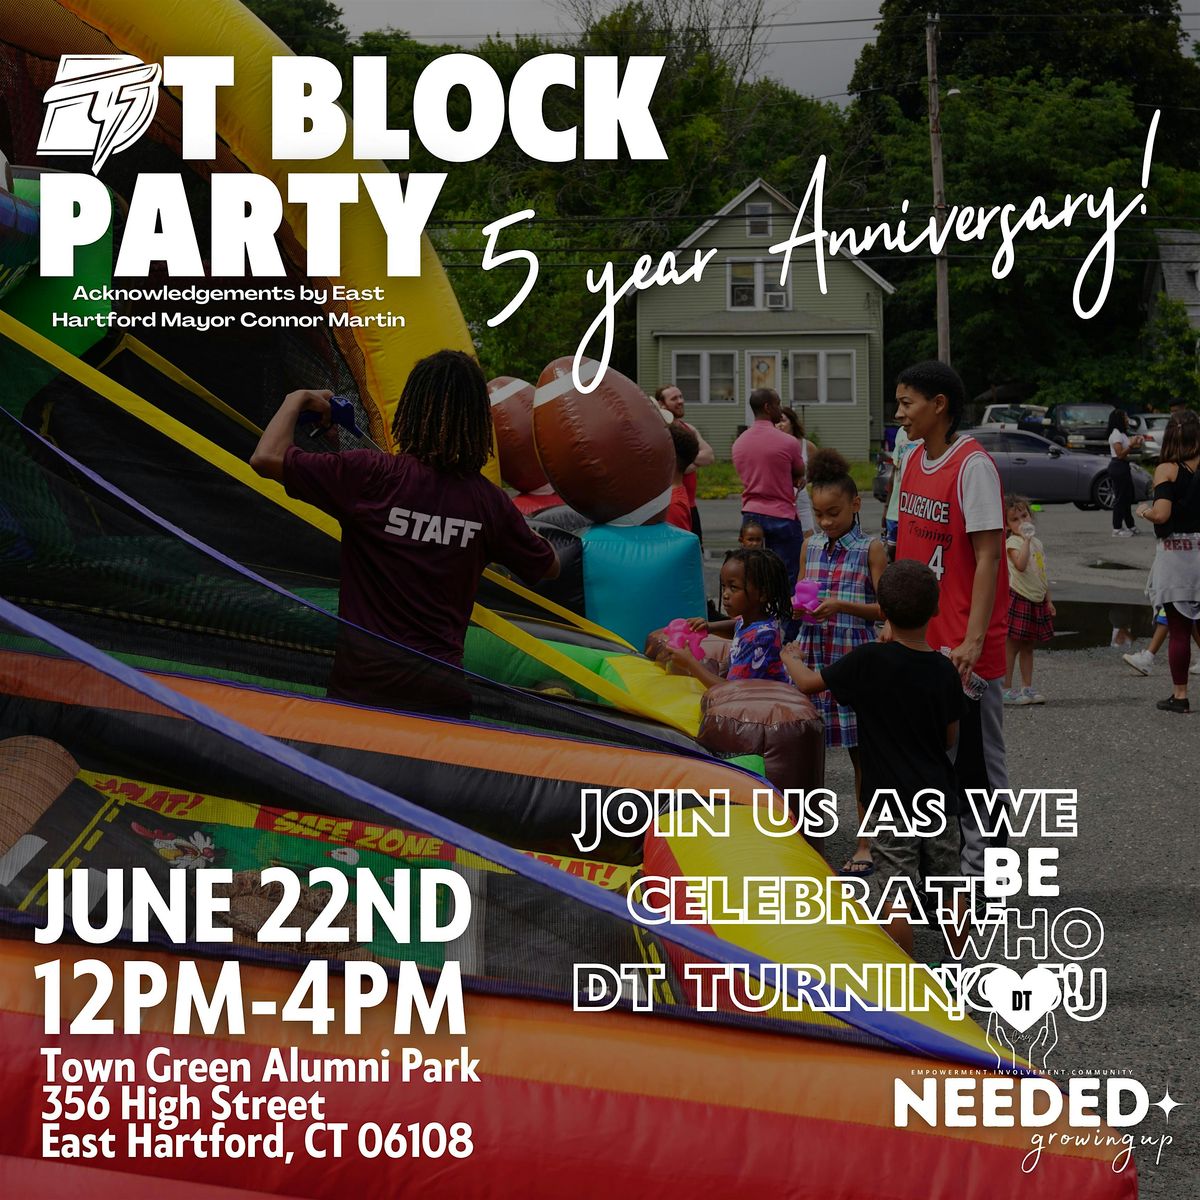 DT Block Party - 5 Year Anniversary Celebration